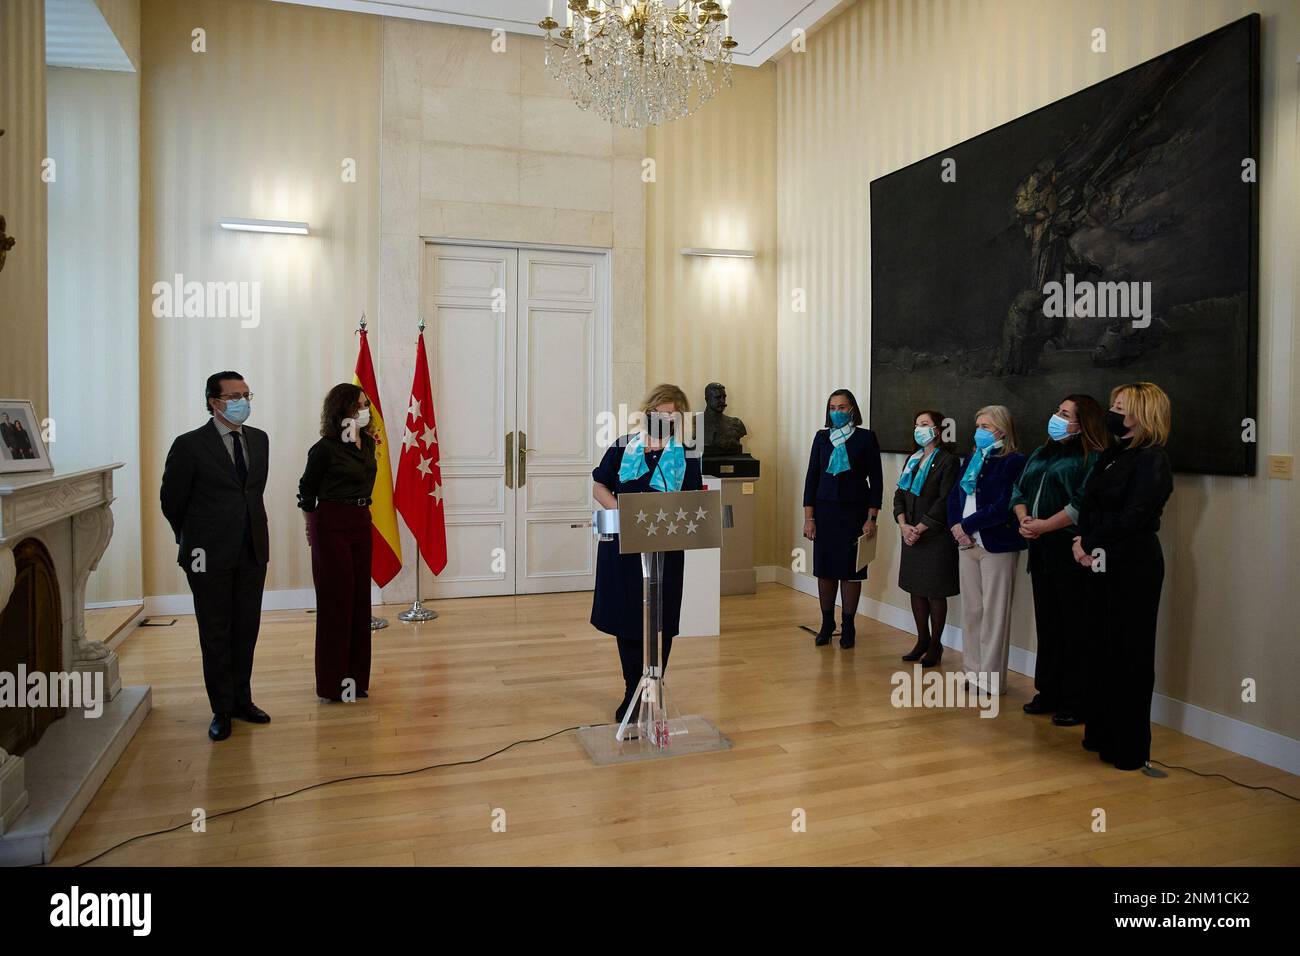 The president of ASEME Businesswomen, Eva Serrano Clavero, speaks at the ceremony in which the 2021 Honor Award was presented to the president of the Community of Madrid, at the Real Casa de Correos, on January 17, 2022, in Madrid, (Spain). The award has been granted by the Spanish Association of Women Entrepreneurs (ASEME), an interprofessional organization created in 1971. 17 JANUARY 2022;CASA DE CORREOS;ASEME;AYUSO Jesús Hellín / Europa Press 01/17/2022 (Europa Press via AP) Stock Photo